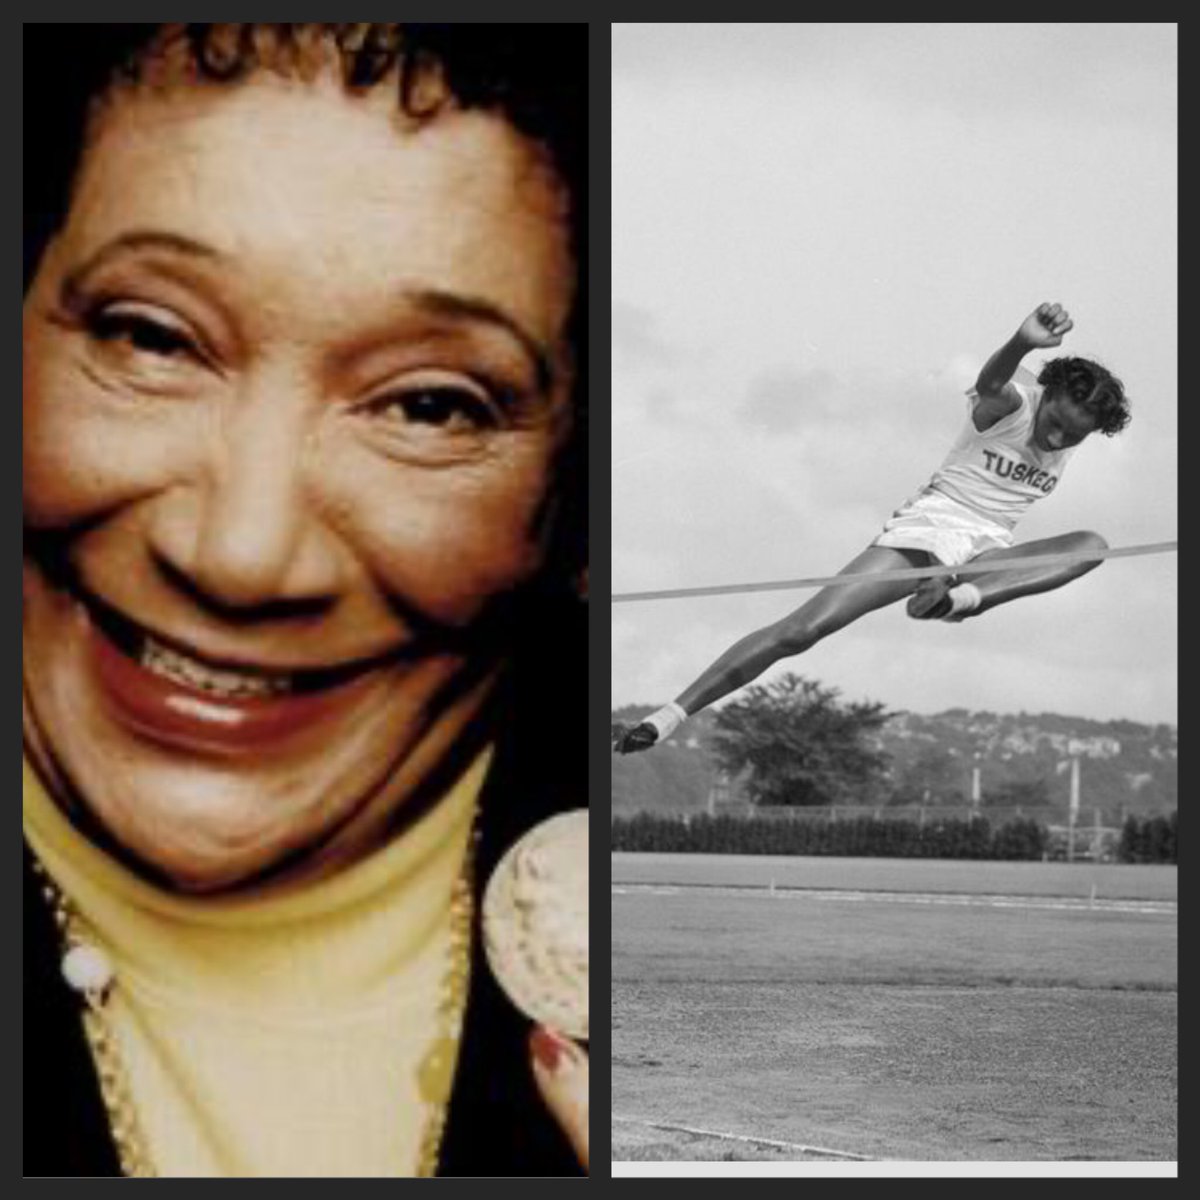 Alice Coachman was born in Albany, GA in 1923. Coachman is the first Black woman from any country to win an Olympic Gold medal in the 1948 London games. She set the high jump record at those games. Alice was inducted into the hall of fame in 1975 and 2004.  #BlackHistoryMonth  